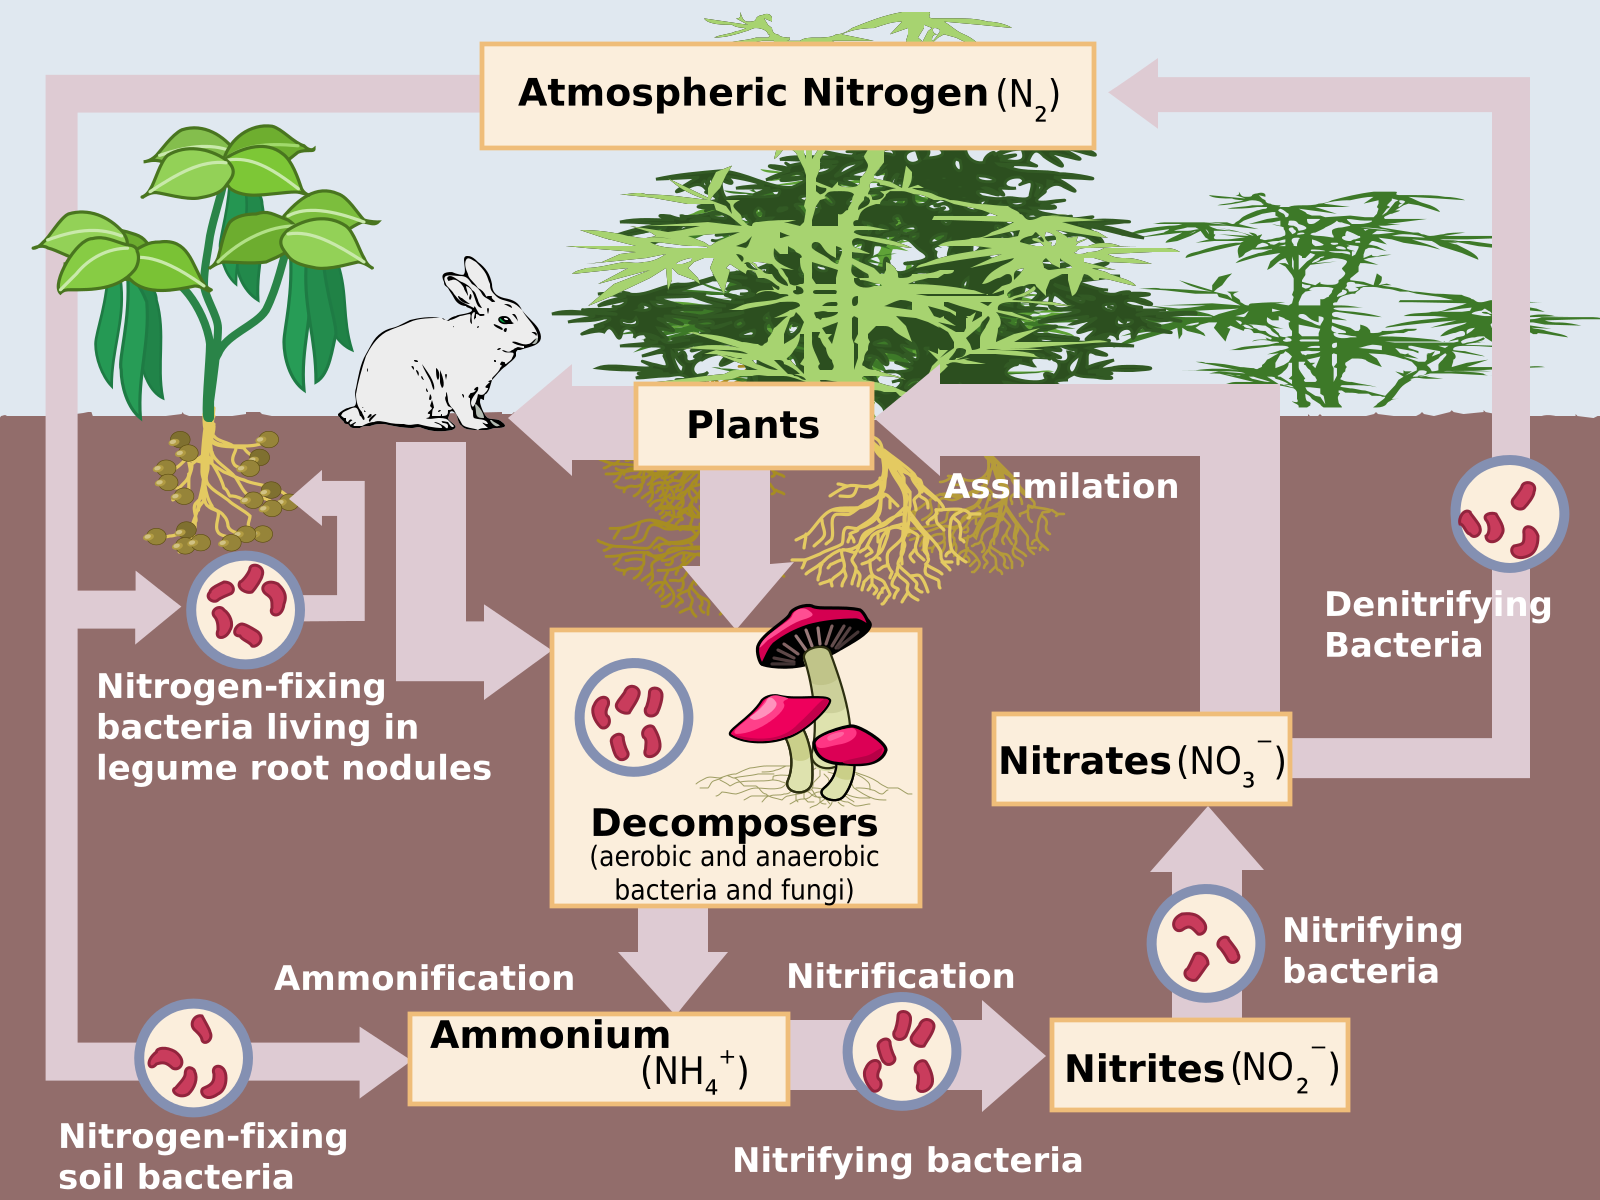 A schematic diagram representing the nitrogen cycle; it consists of interconnected arrows and labeled boxes, showcasing the various stages and transformations of nitrogen. The cycle begins with atmospheric nitrogen (N2), which is converted into ammonium (NH4+) through nitrogen fixation, represented by an arrow pointing through nitrogen-fixing soil bacteria in the subsurface. The ammonium then undergoes nitrification, shown by arrows leading through nitrifying bacteria in the ground to a box labeled Nitrites (NO2-) and an arrow from that box leading through more nitrifying bacteria leading to a box labeled Nitrates (NO3-). From there, the nitrates are taken up by plants, indicated by an arrow labeled Assimilation, pointing towards a labeled plants box. The nitrogen can then move through the food chain as organisms consume the plants, depicted by an arrow leading to a rabbit. Plants and animals that die are consumed by Decomposers, represented by arrows from the Plants box and rabbit drawing that leads into the ground to a box labeled Decomposers. Denitrification, represented by an arrow leading from Nitrates, through denitrifying bacteria, and pointing back to atmospheric nitrogen, completes the cycle.